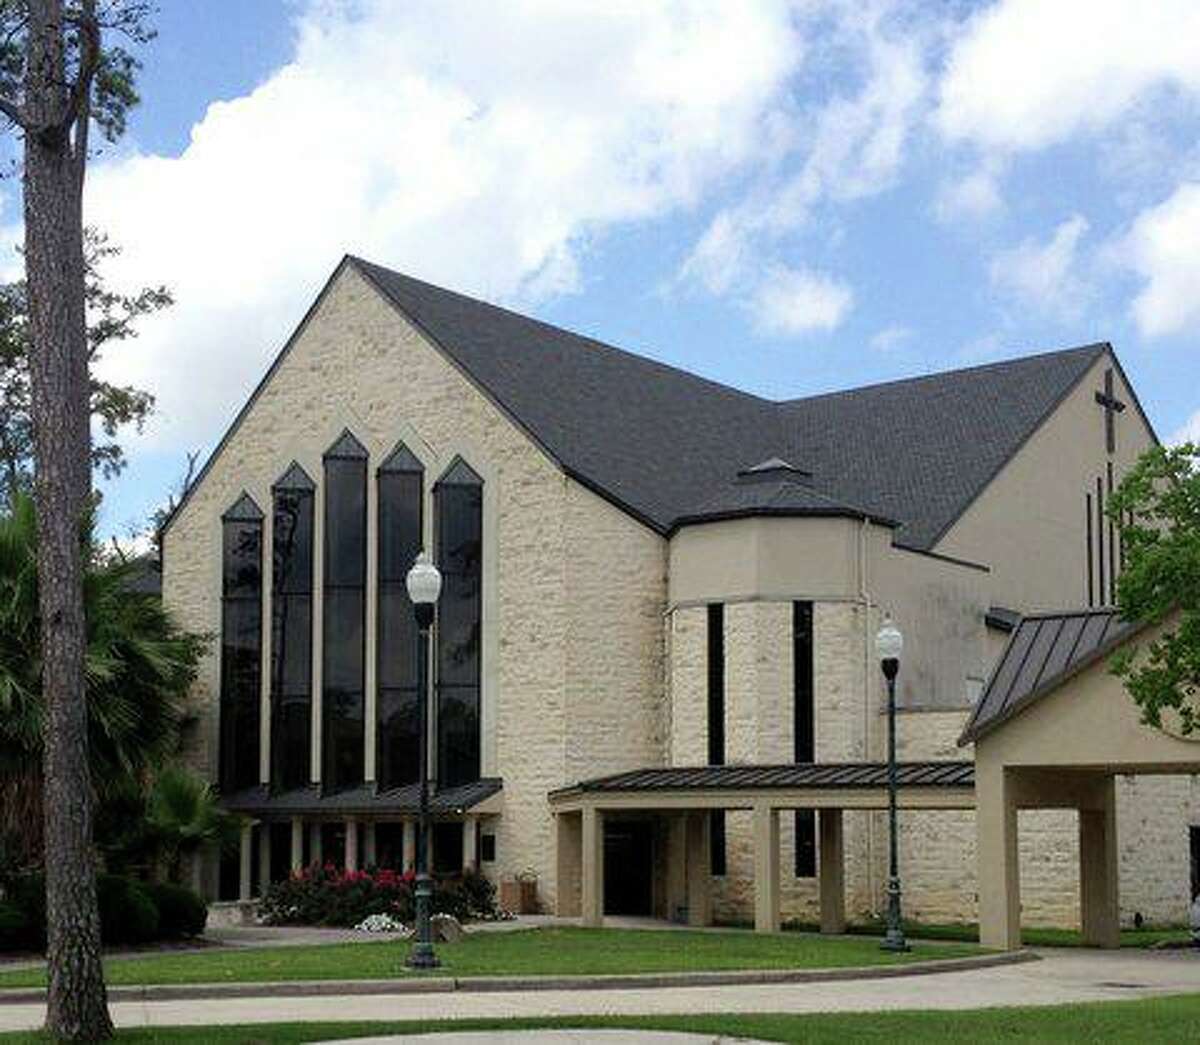 Cypress Creek Christian Church, which celebrates its 50th anniversary this year.